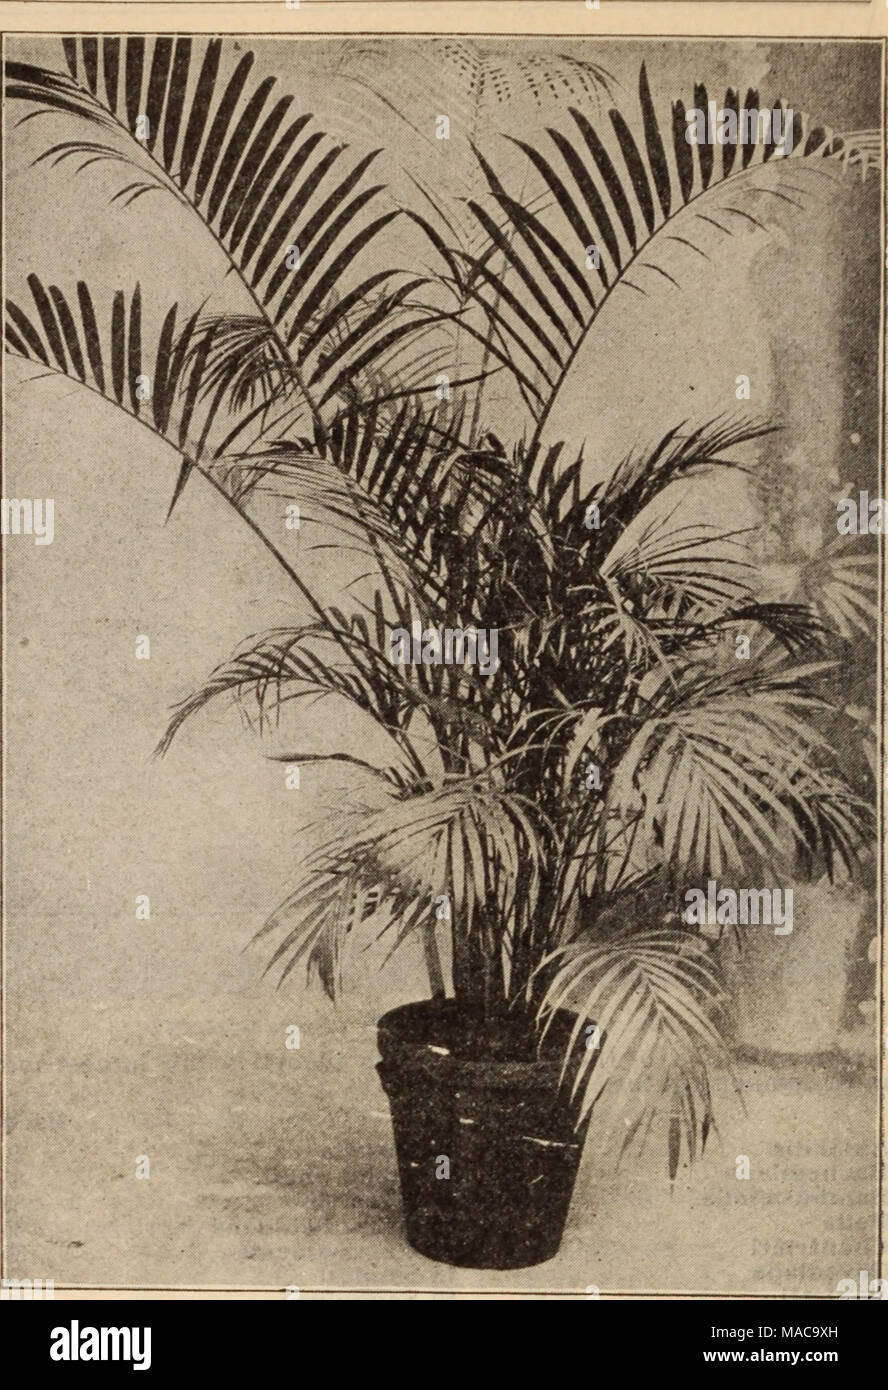 . Dreer's wholesale price list / Henry A. Dreer. . COCOS WEDDELIANA ARECA LUTESCENS Caryota Blancoii. A rare variety of the Fish-tail Palm. 3-inch pots, $1.50 per doz.; $10.00 per 100. Caryota Urens. 2Vi-inch pots, $1.25 per doz.; $8.00 per 100. Chama&amp;dora Elegans. 3-inch pots, $1.50 per doz.; $10.00 per 100. Cocos Flexuosus and Plumosus. Extensively used in parts of California and Louisiana for out-door planting, and also valuable for decorative purposes. 2%-inch pots, $1.50 per doz.; $10.00 per 100. A limited stock of large decorative plants, 7 to 8 feet high, $10.00 each. Cocos Weddelia Stock Photo